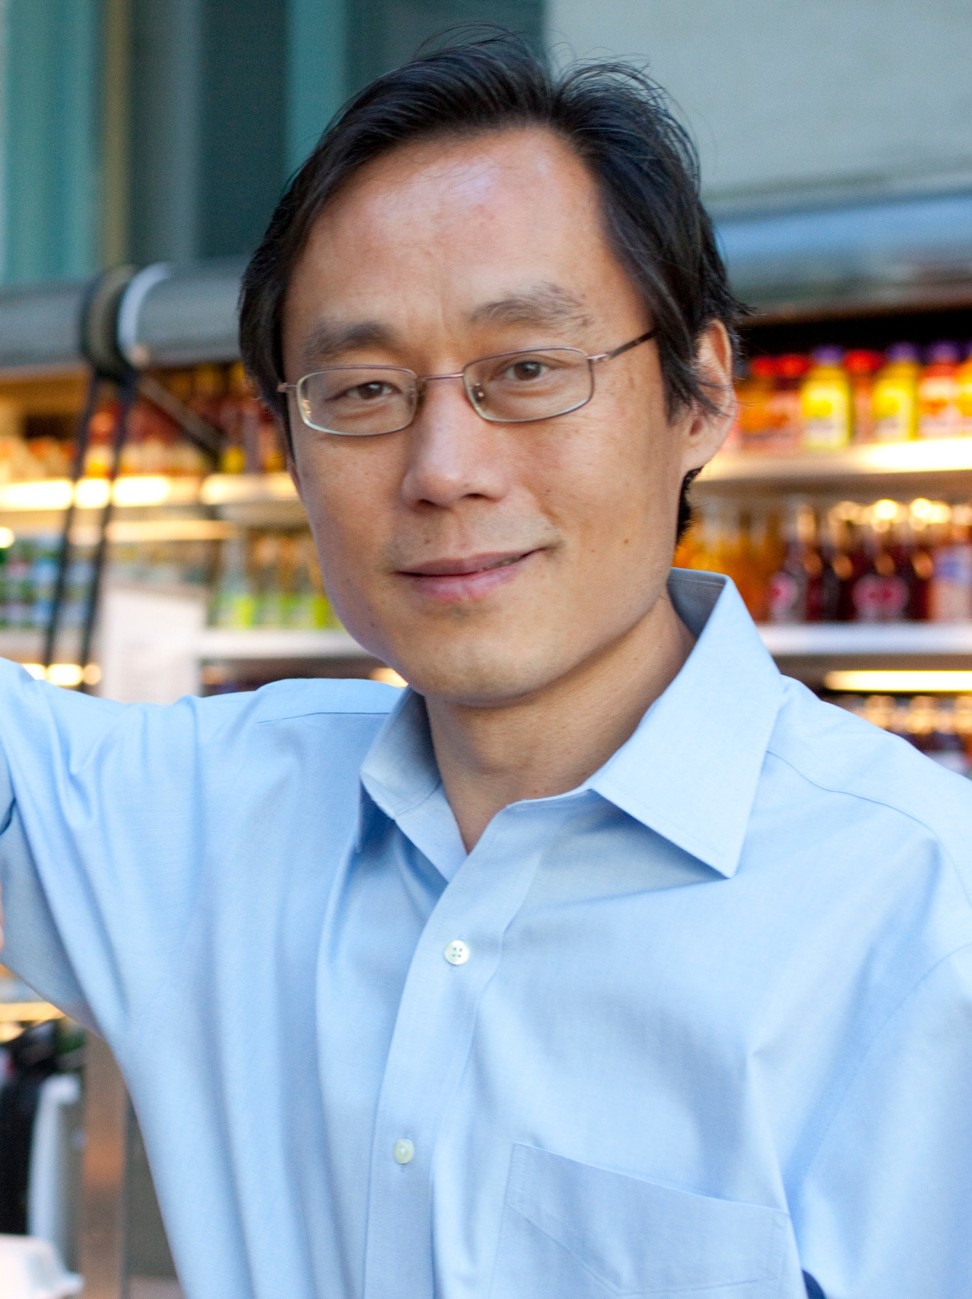 Frank Hu is chair of the department of nutrition at the Harvard TH Chan School, and lead author of the study.